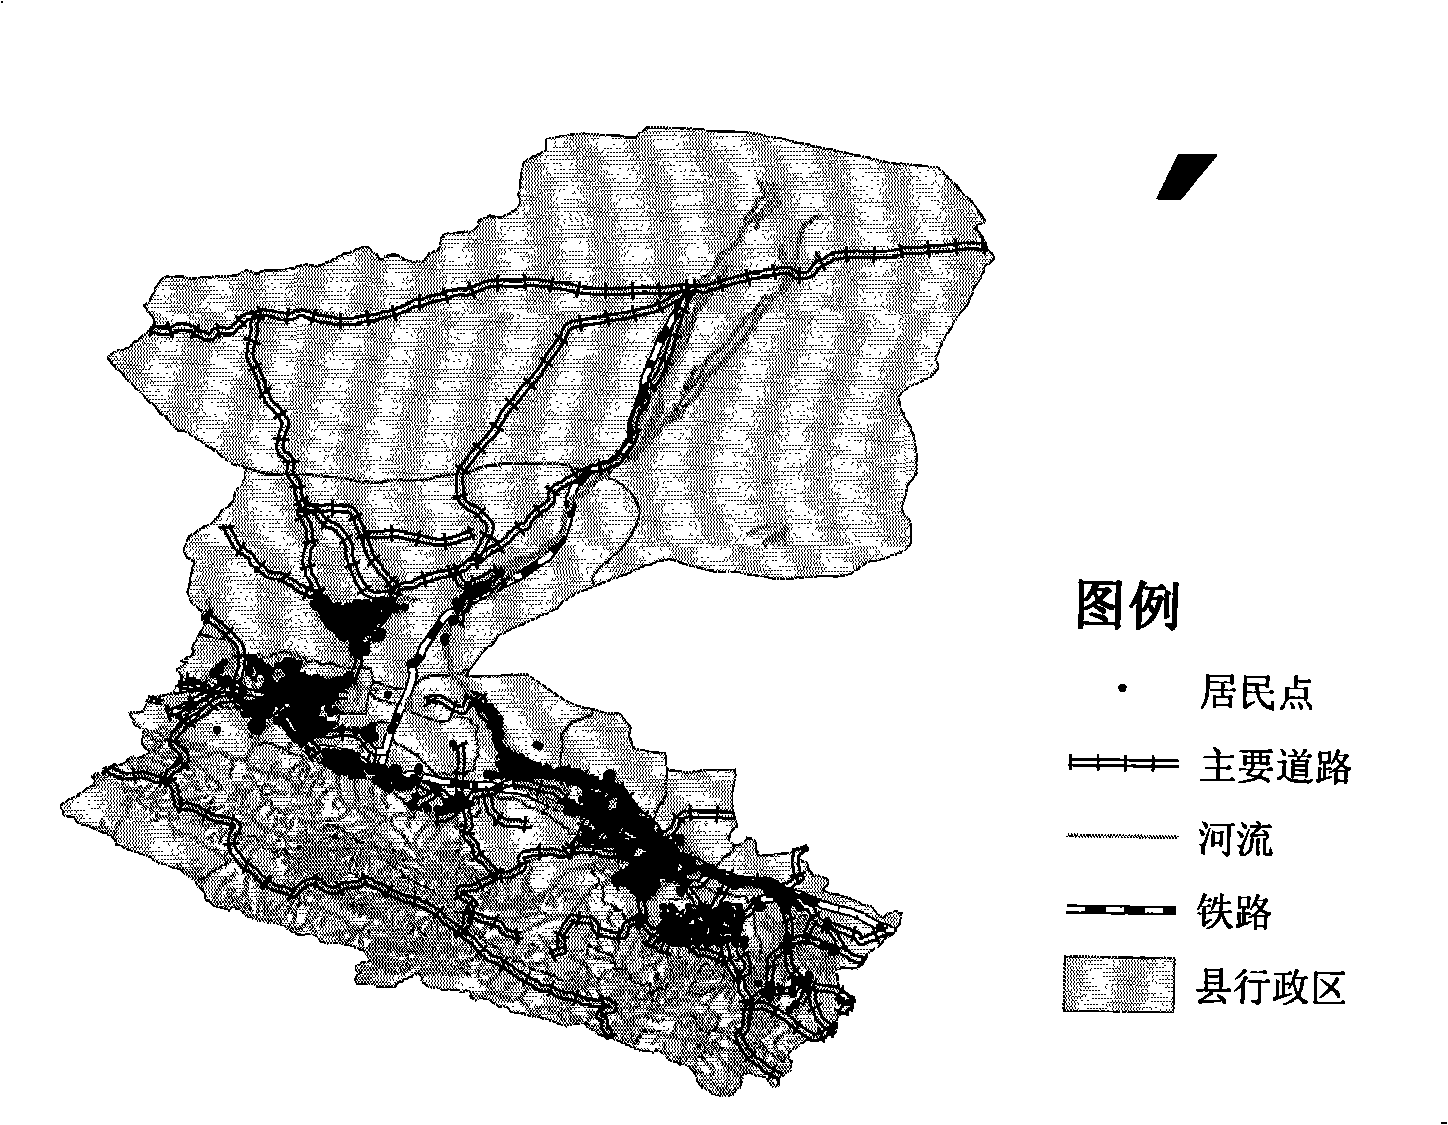 Method for predicting dynamic risk and vulnerability under fine dimension